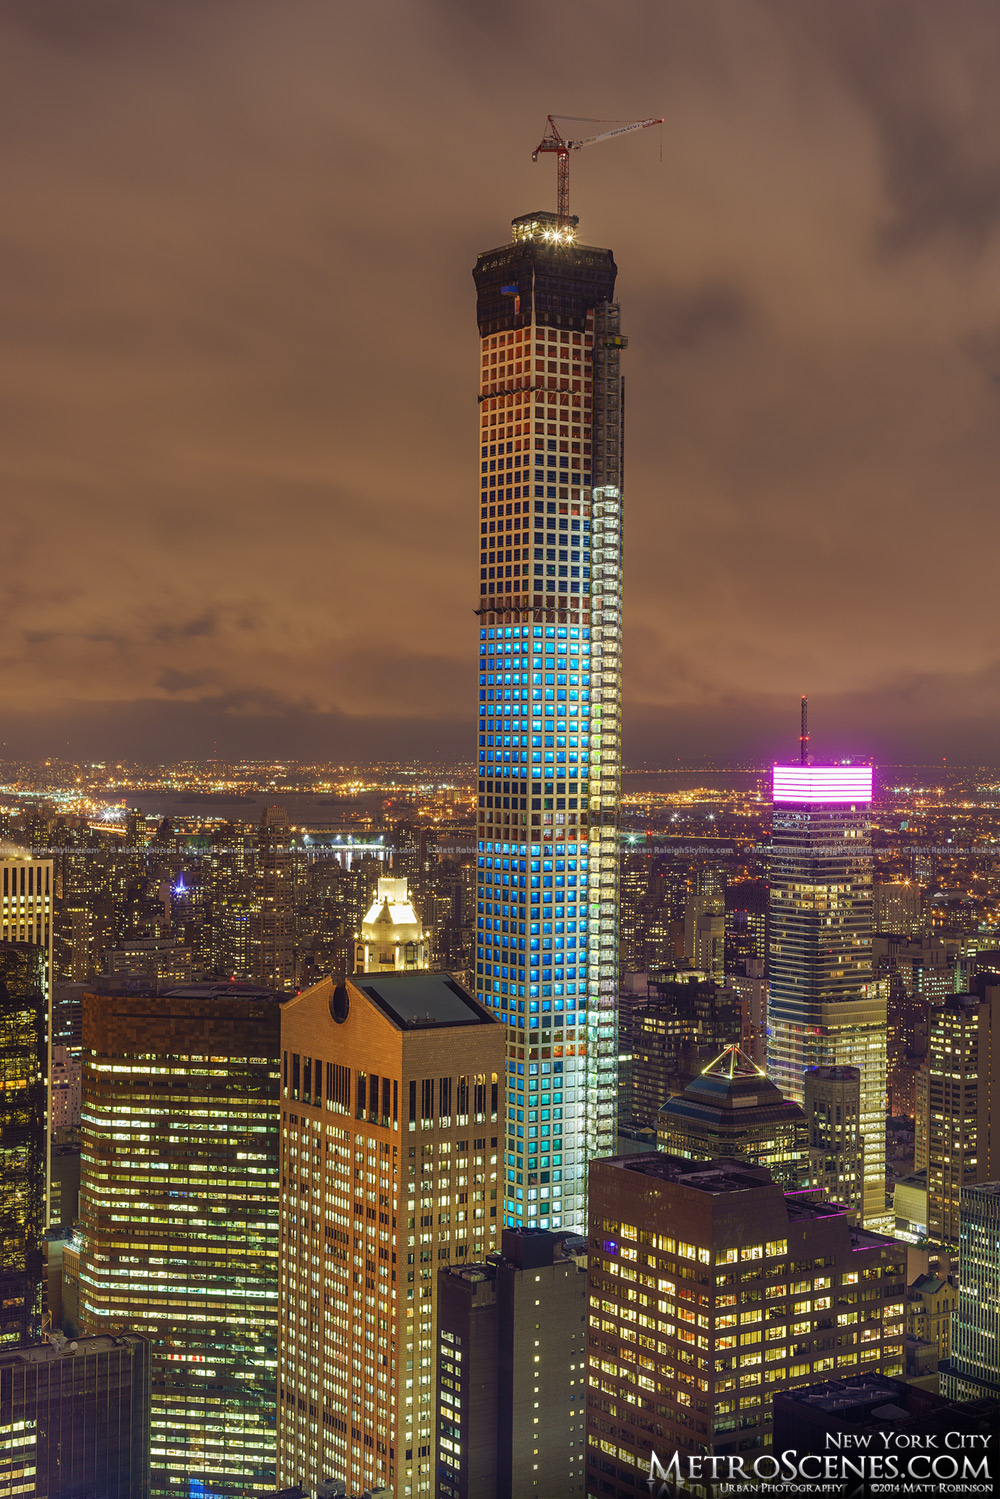 432 Park Avenue stands tall at night